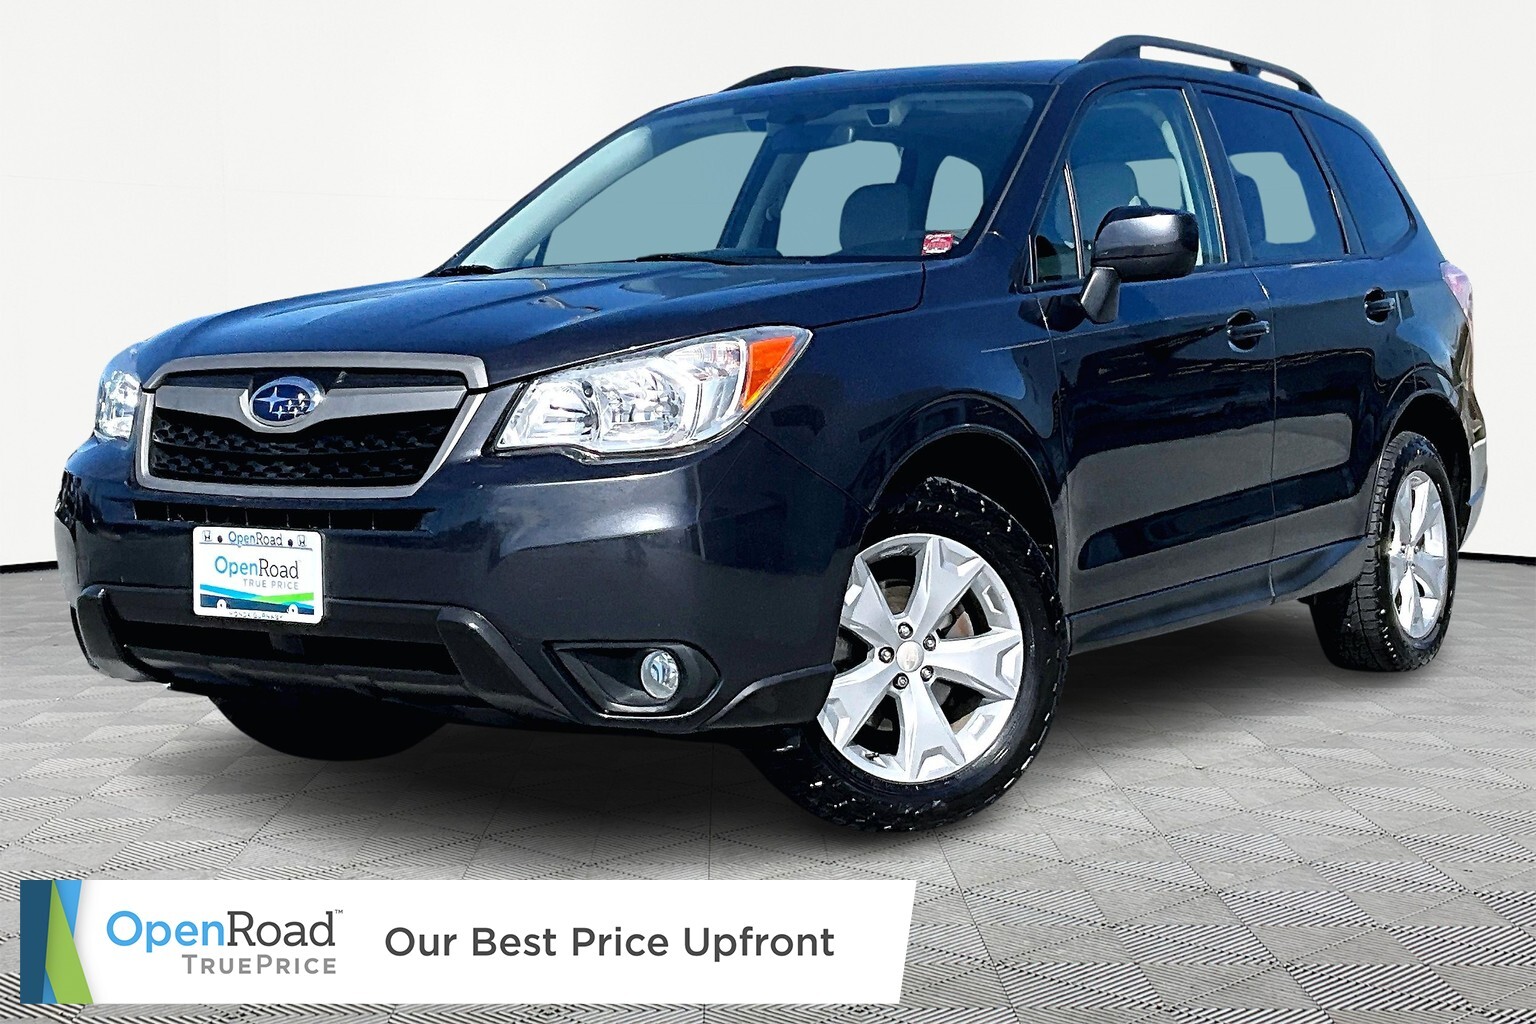 2015 Subaru Forester 2.5i Touring w/ Technology at